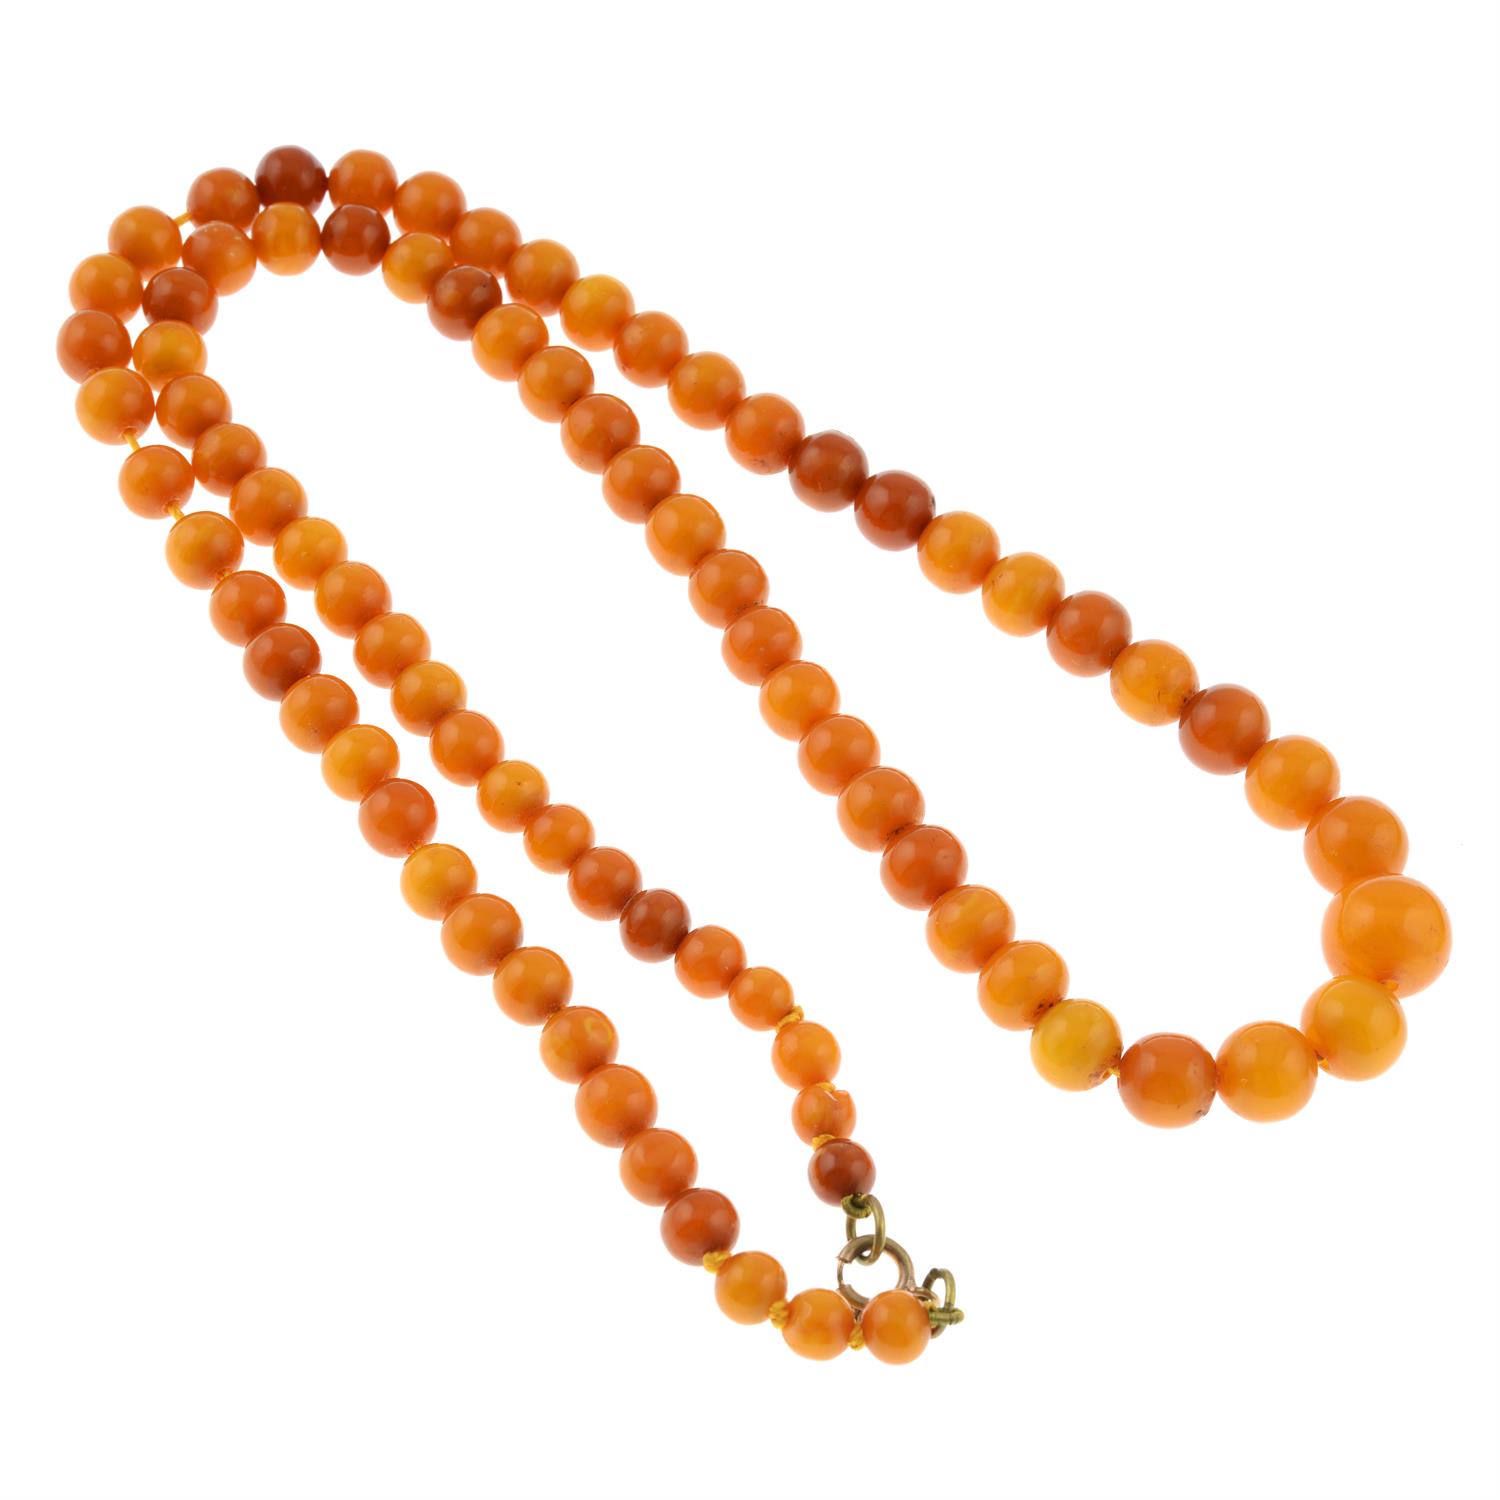 A single-strand amber bead necklace. - Image 2 of 2